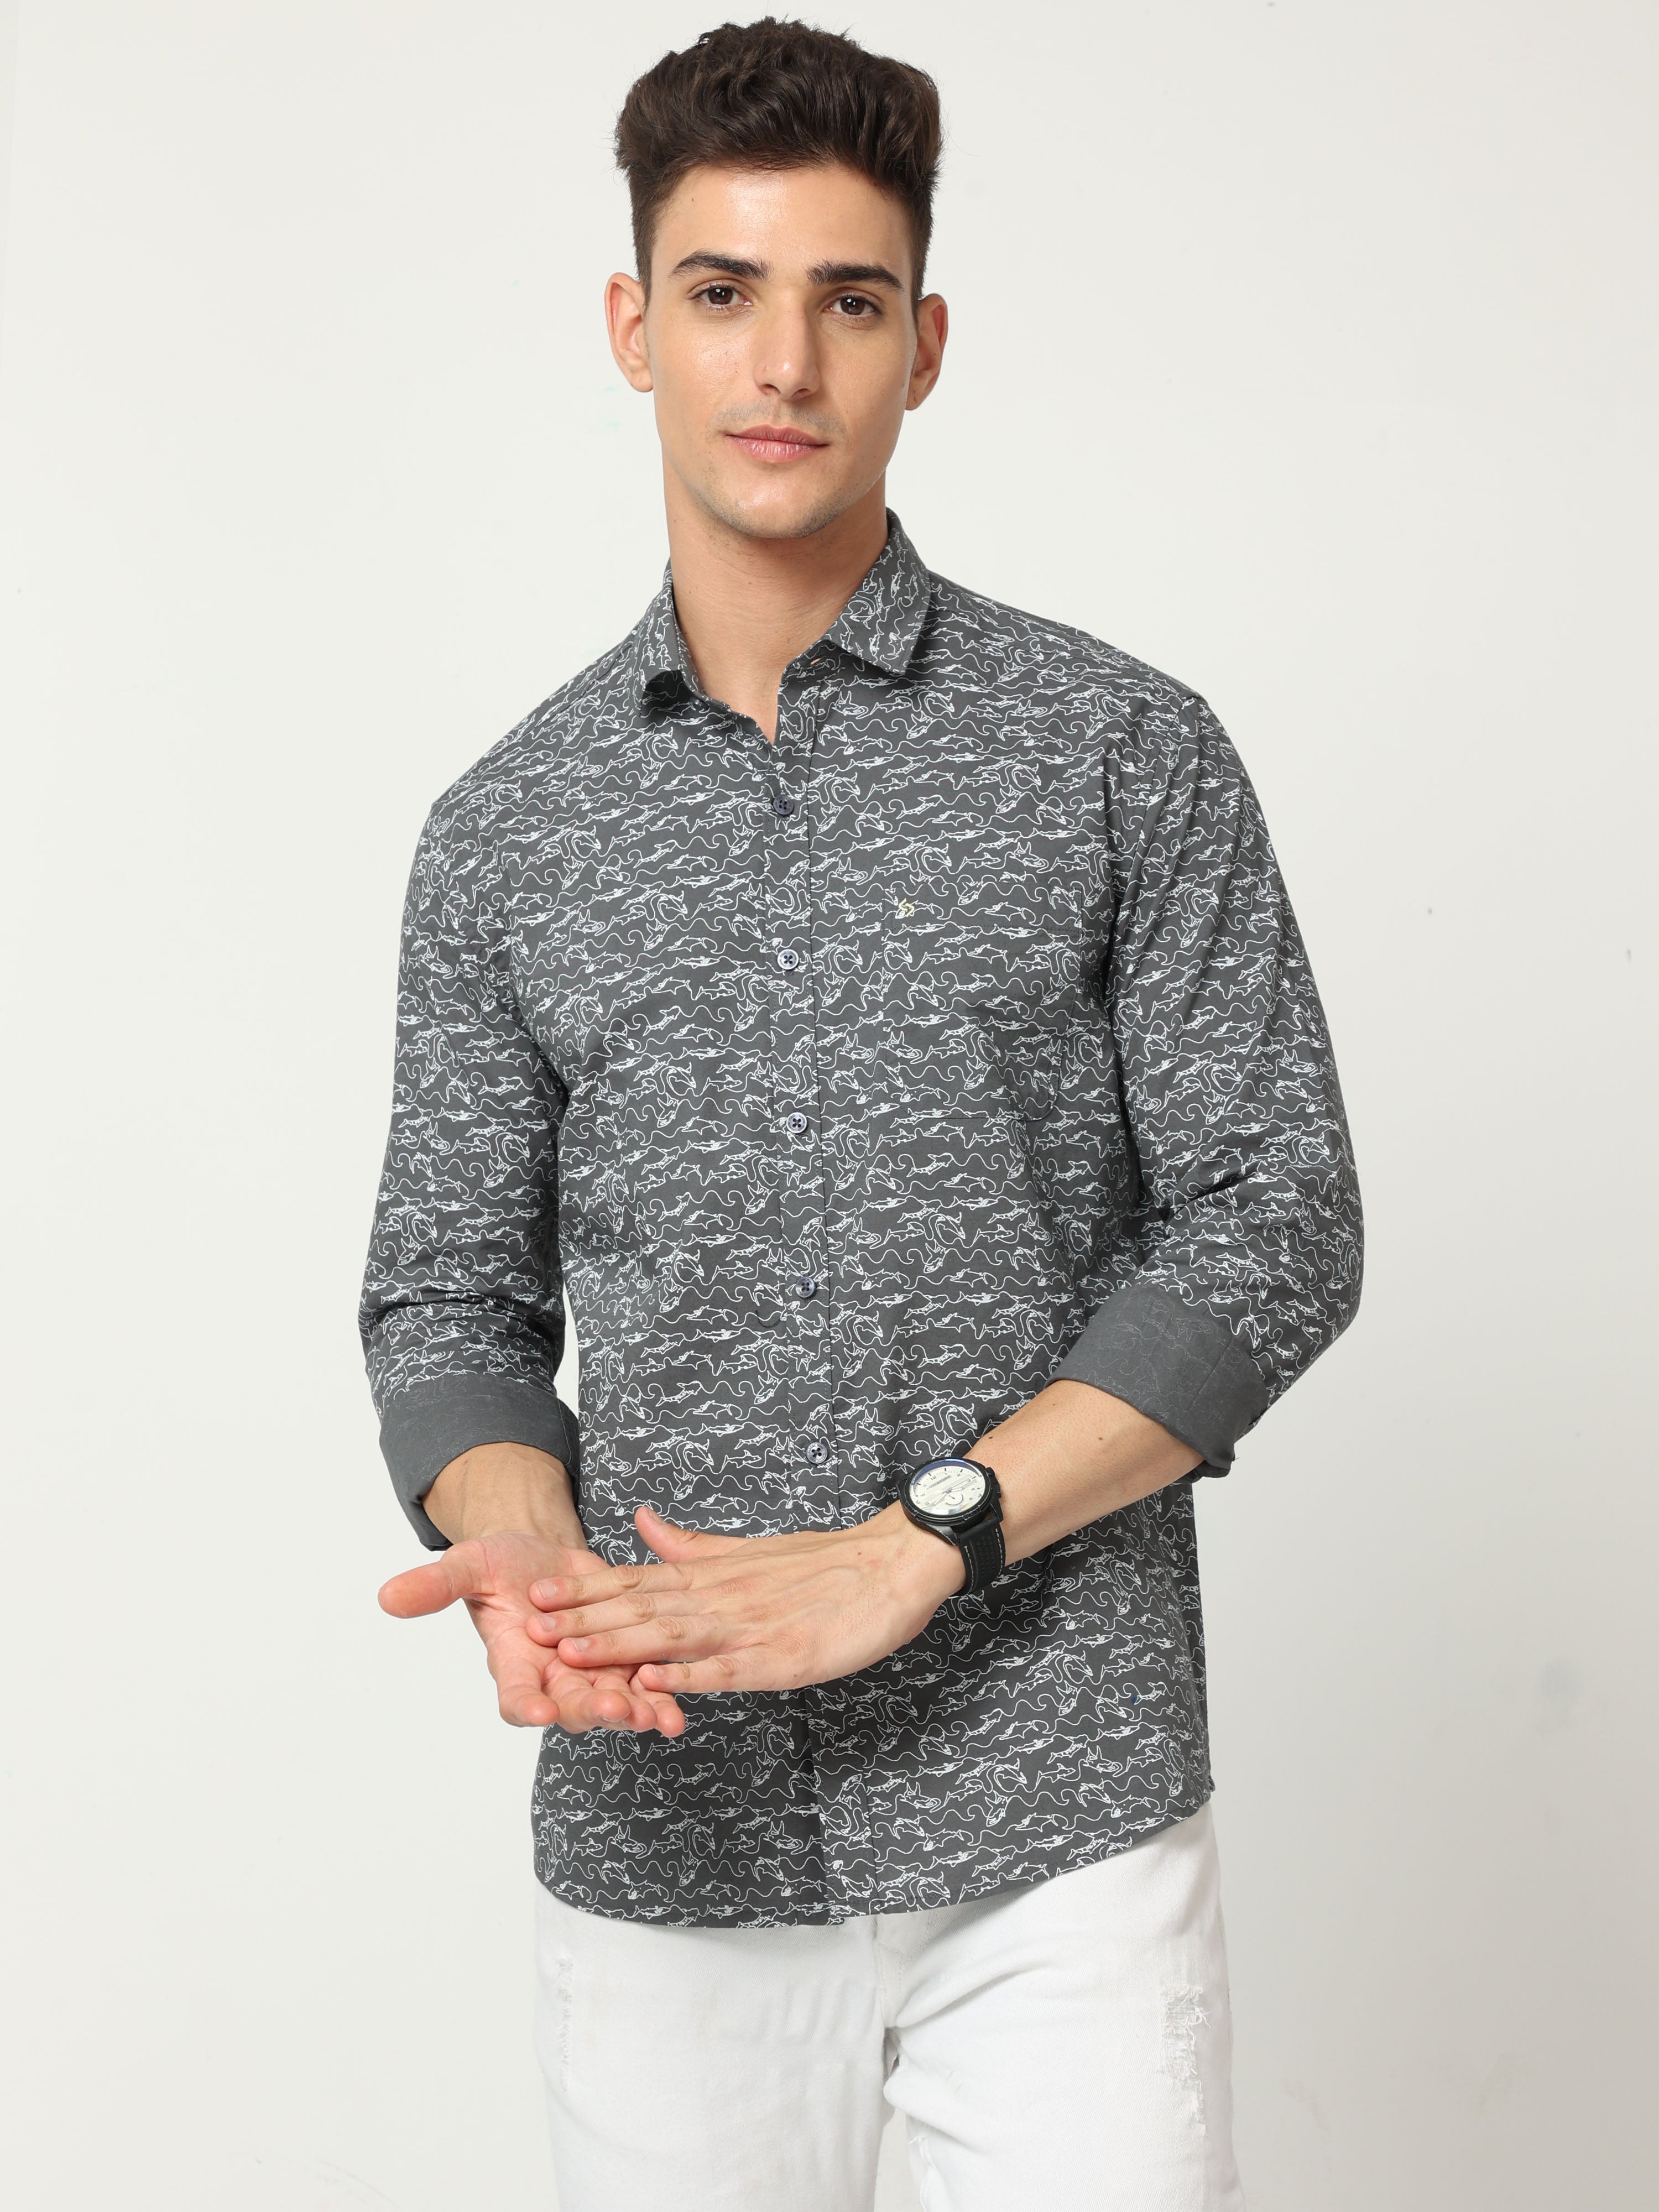 Classic Polo Mens Cotton Full Sleeve Printed Slim Fit Polo Neck Grey Color Woven Shirt | SO1-148 B-FS-PRT